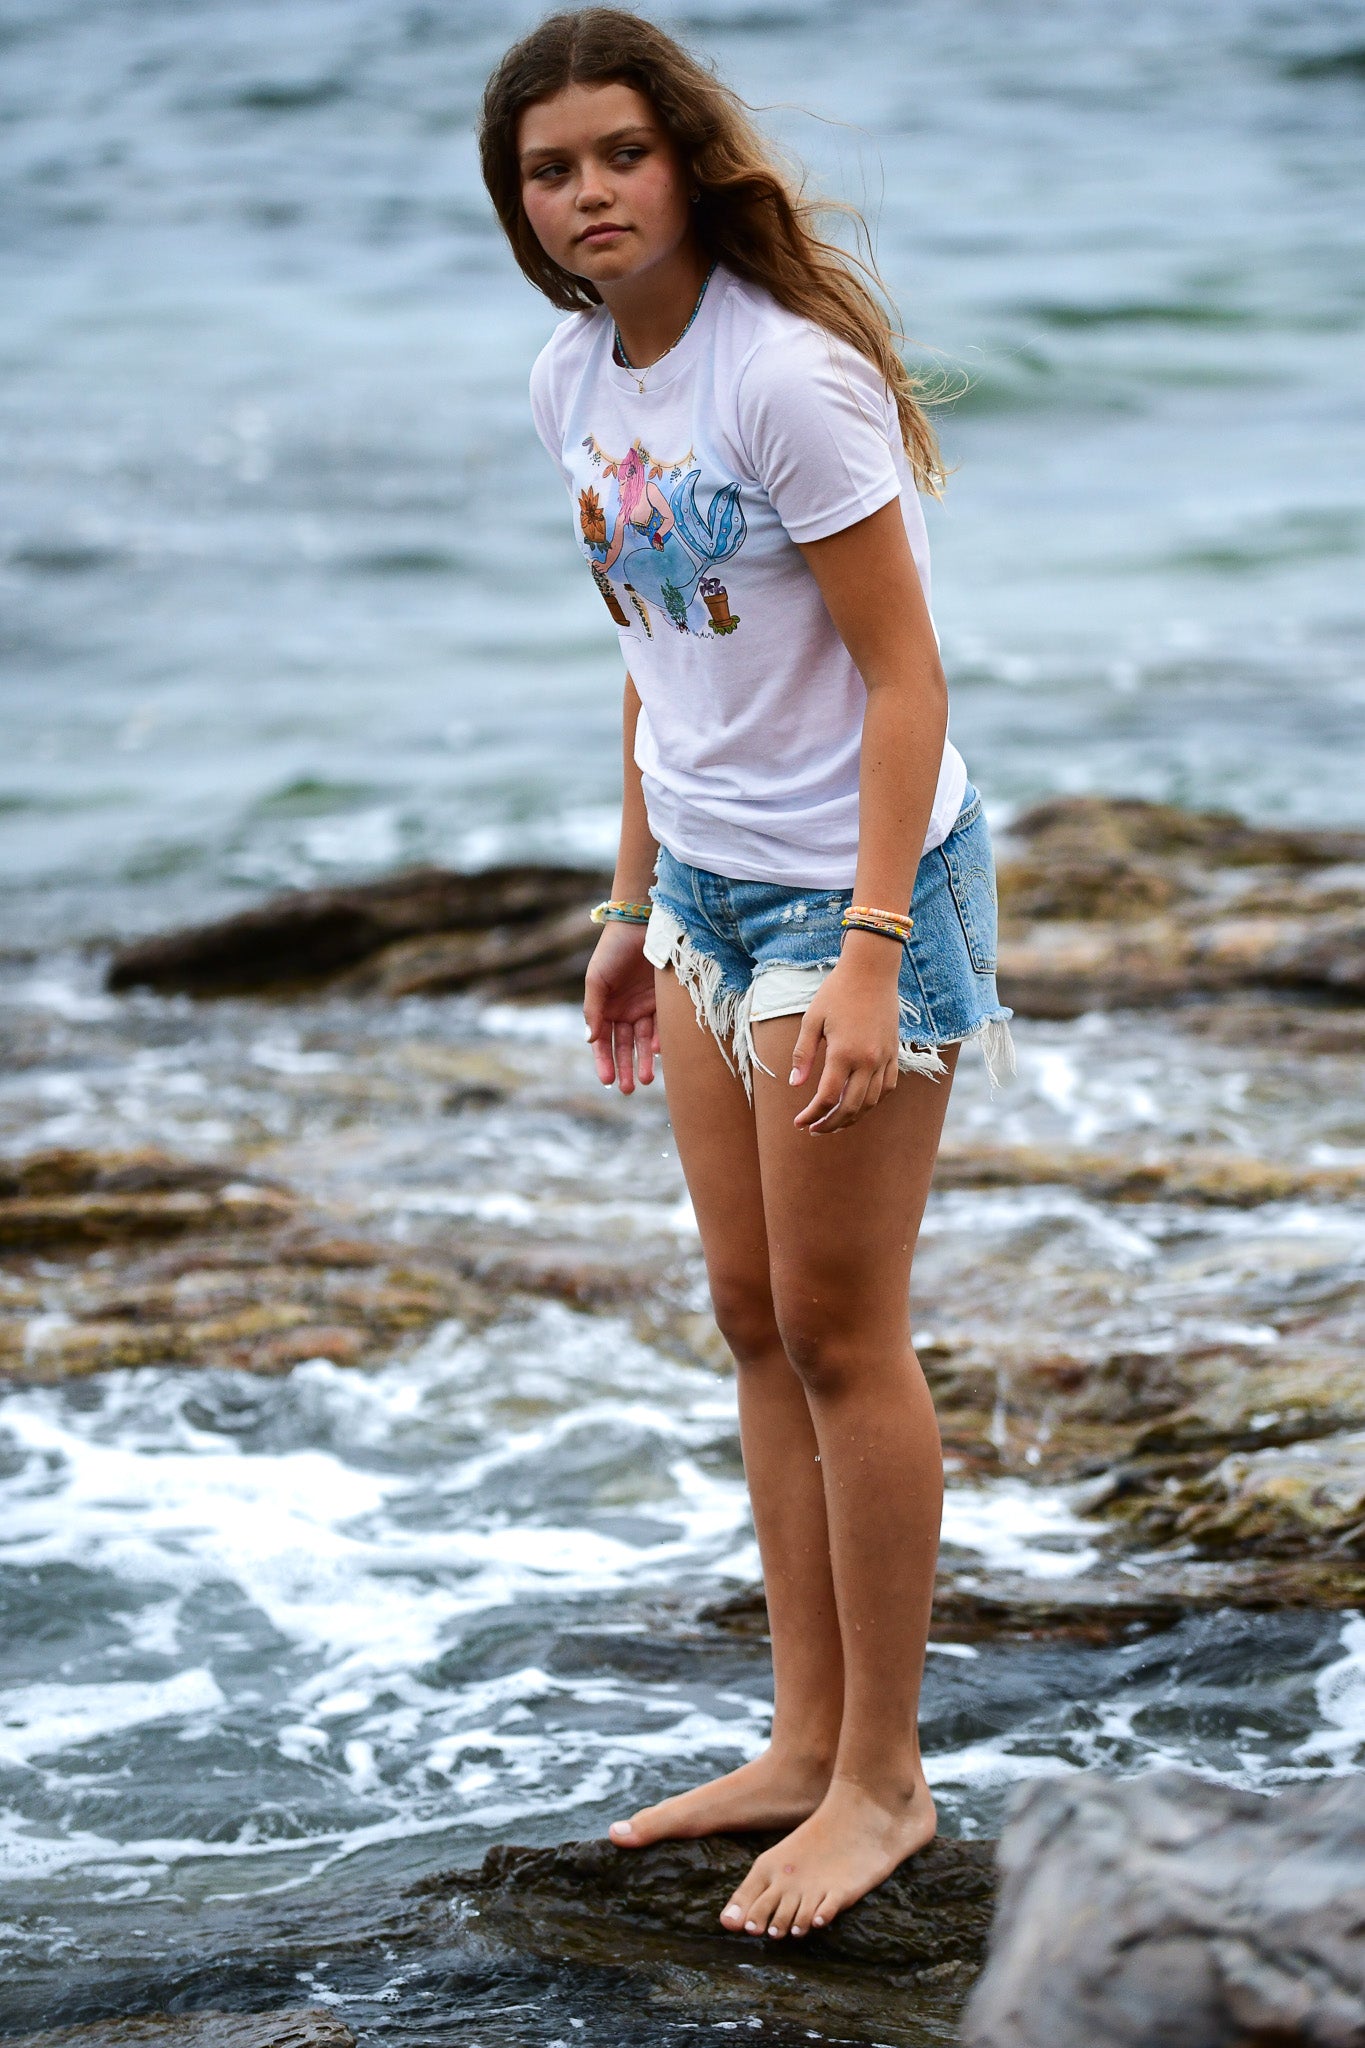 North Shore Girls graphic tee collection for girls. Pink hair mermaid planting flowers illustrated by an artist in Southern California. Beach surf tee